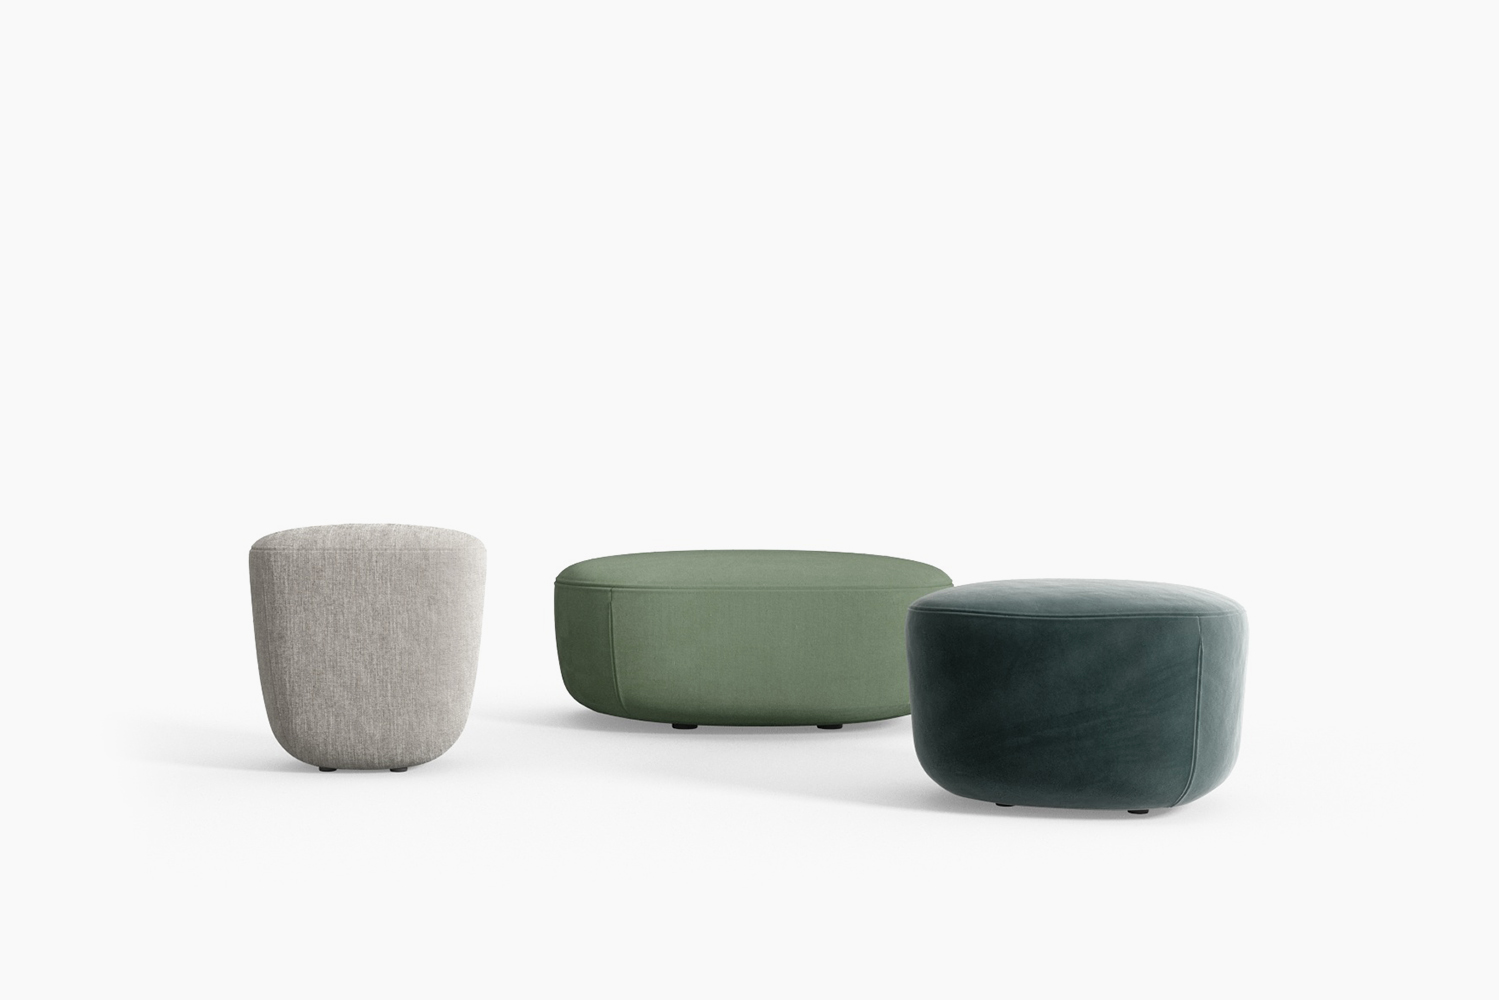 Luxury collection of modern ottomans / footstools by Novamobili. Brought to you by Krieder UK.